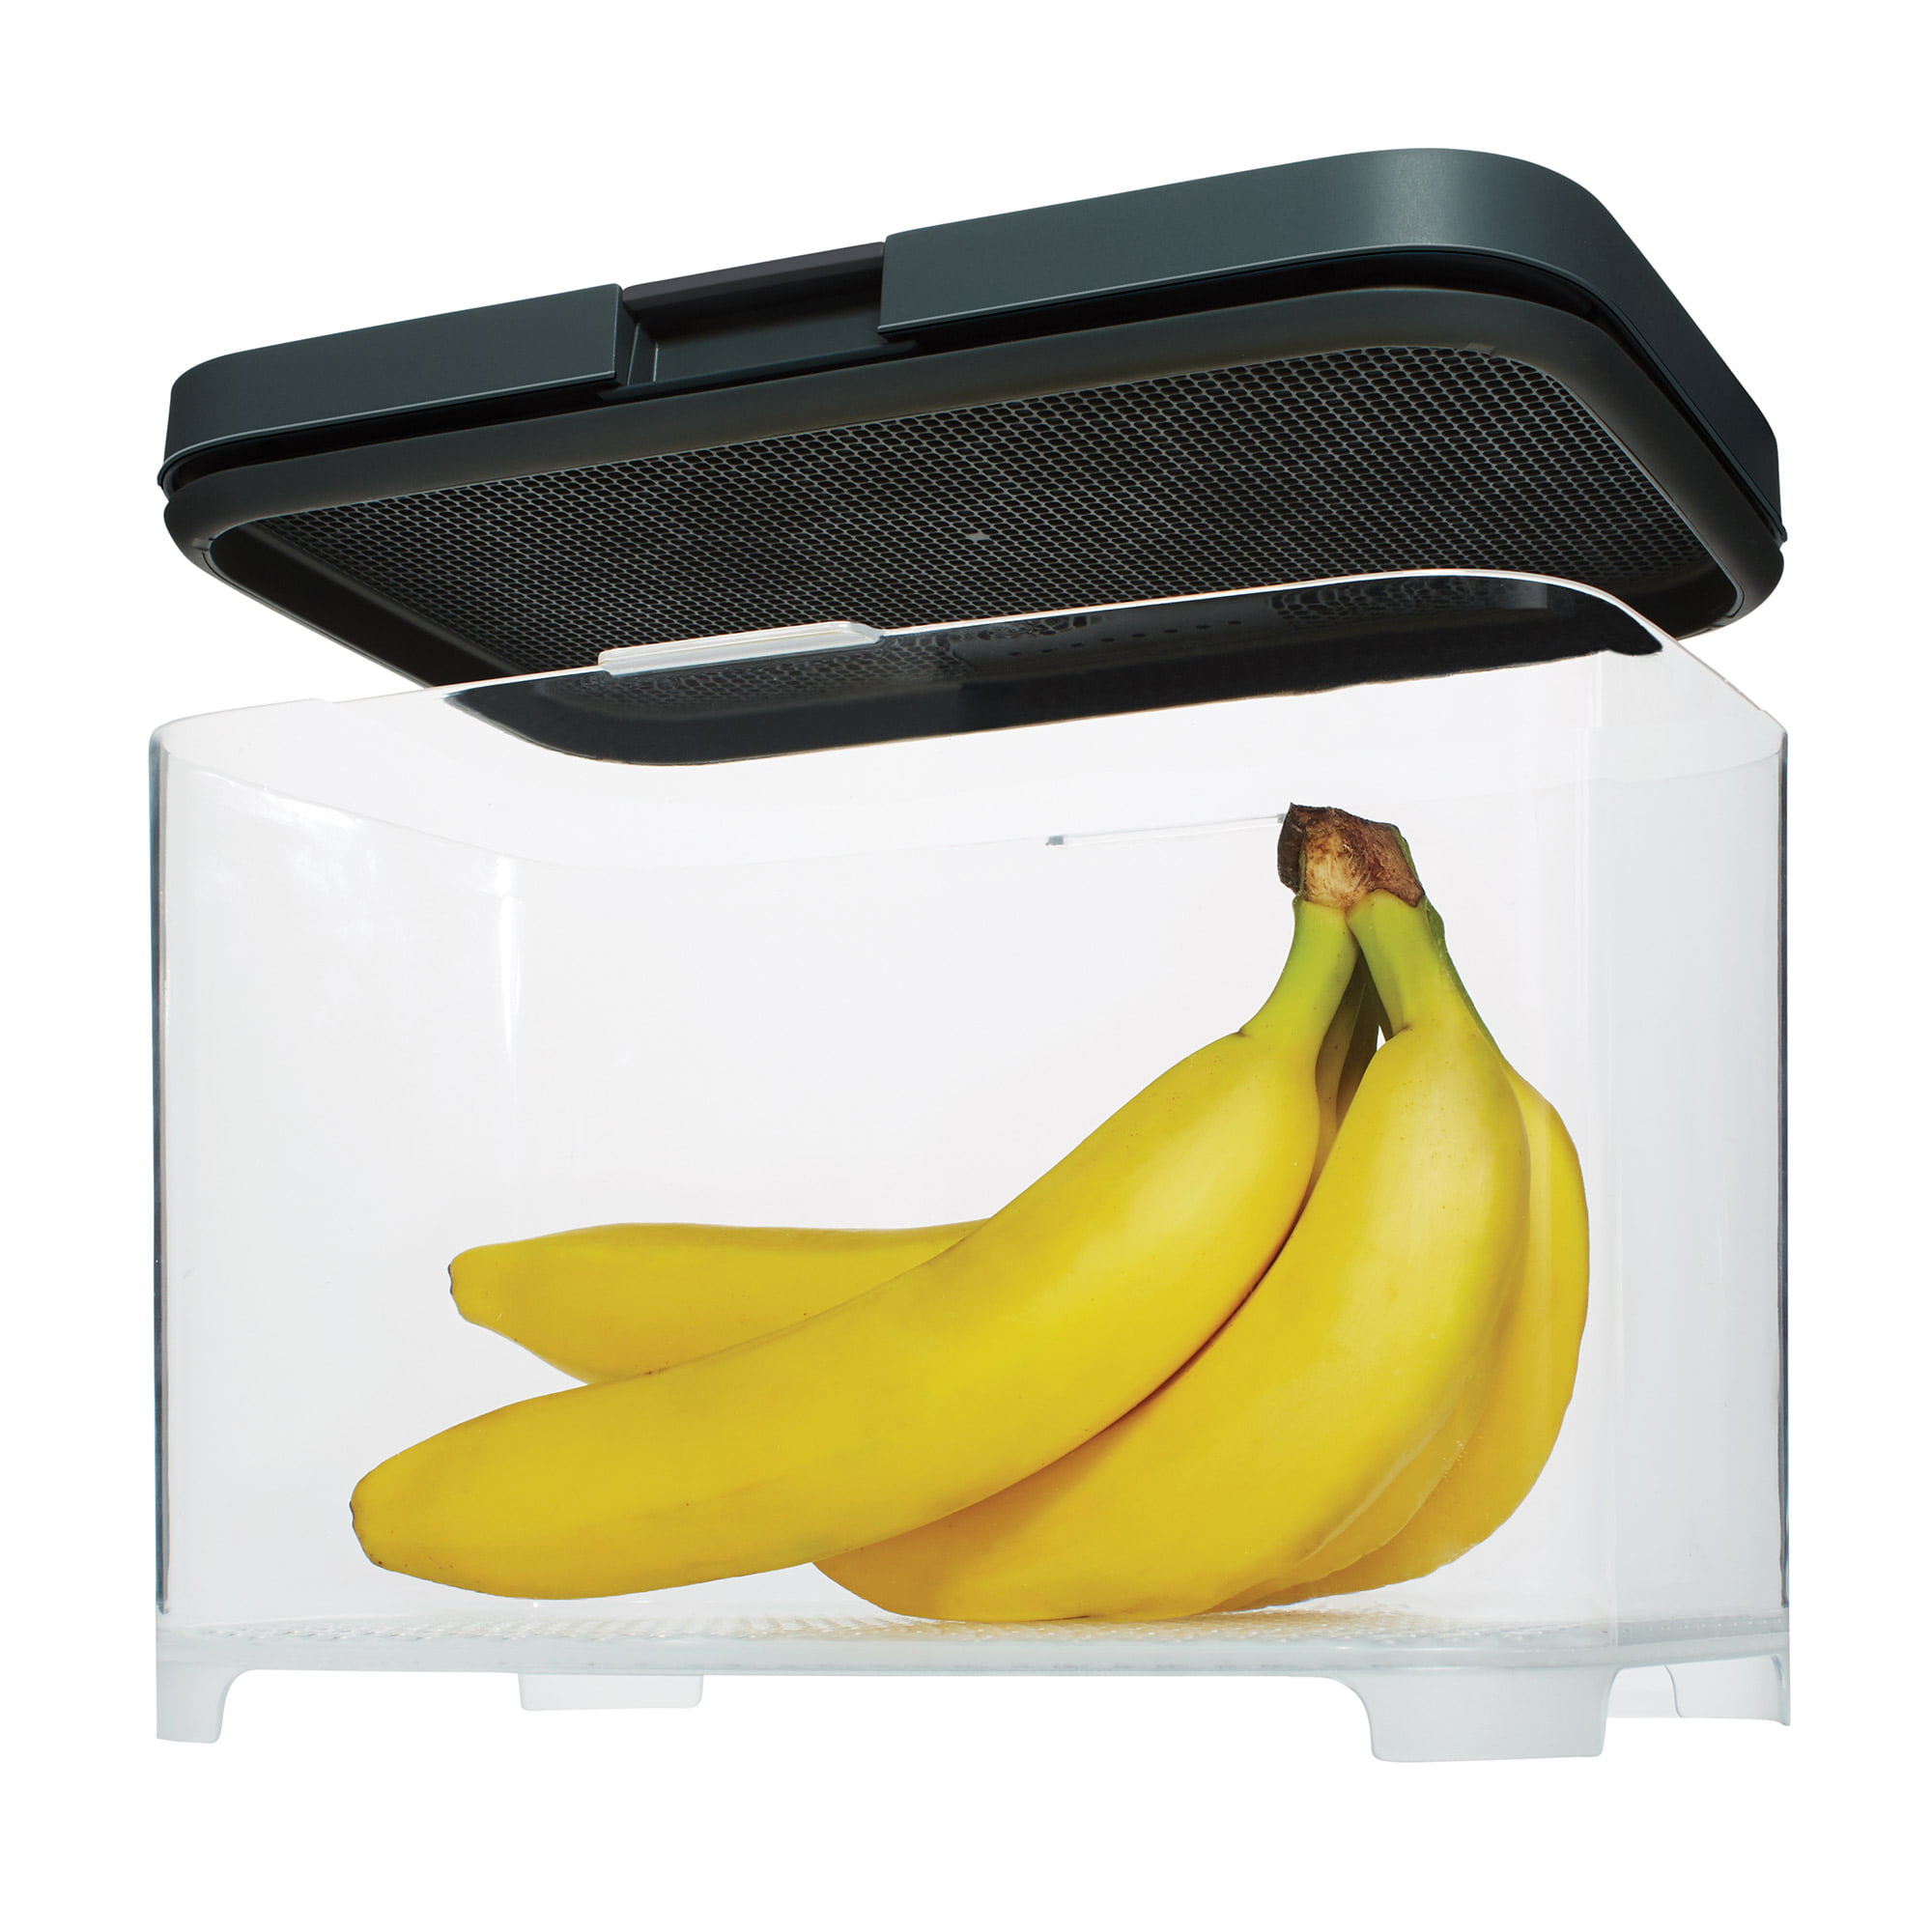 My Candid Canvas: Rubbermaid® FreshWorks™ Produce Savers Truly Saved My  Produce